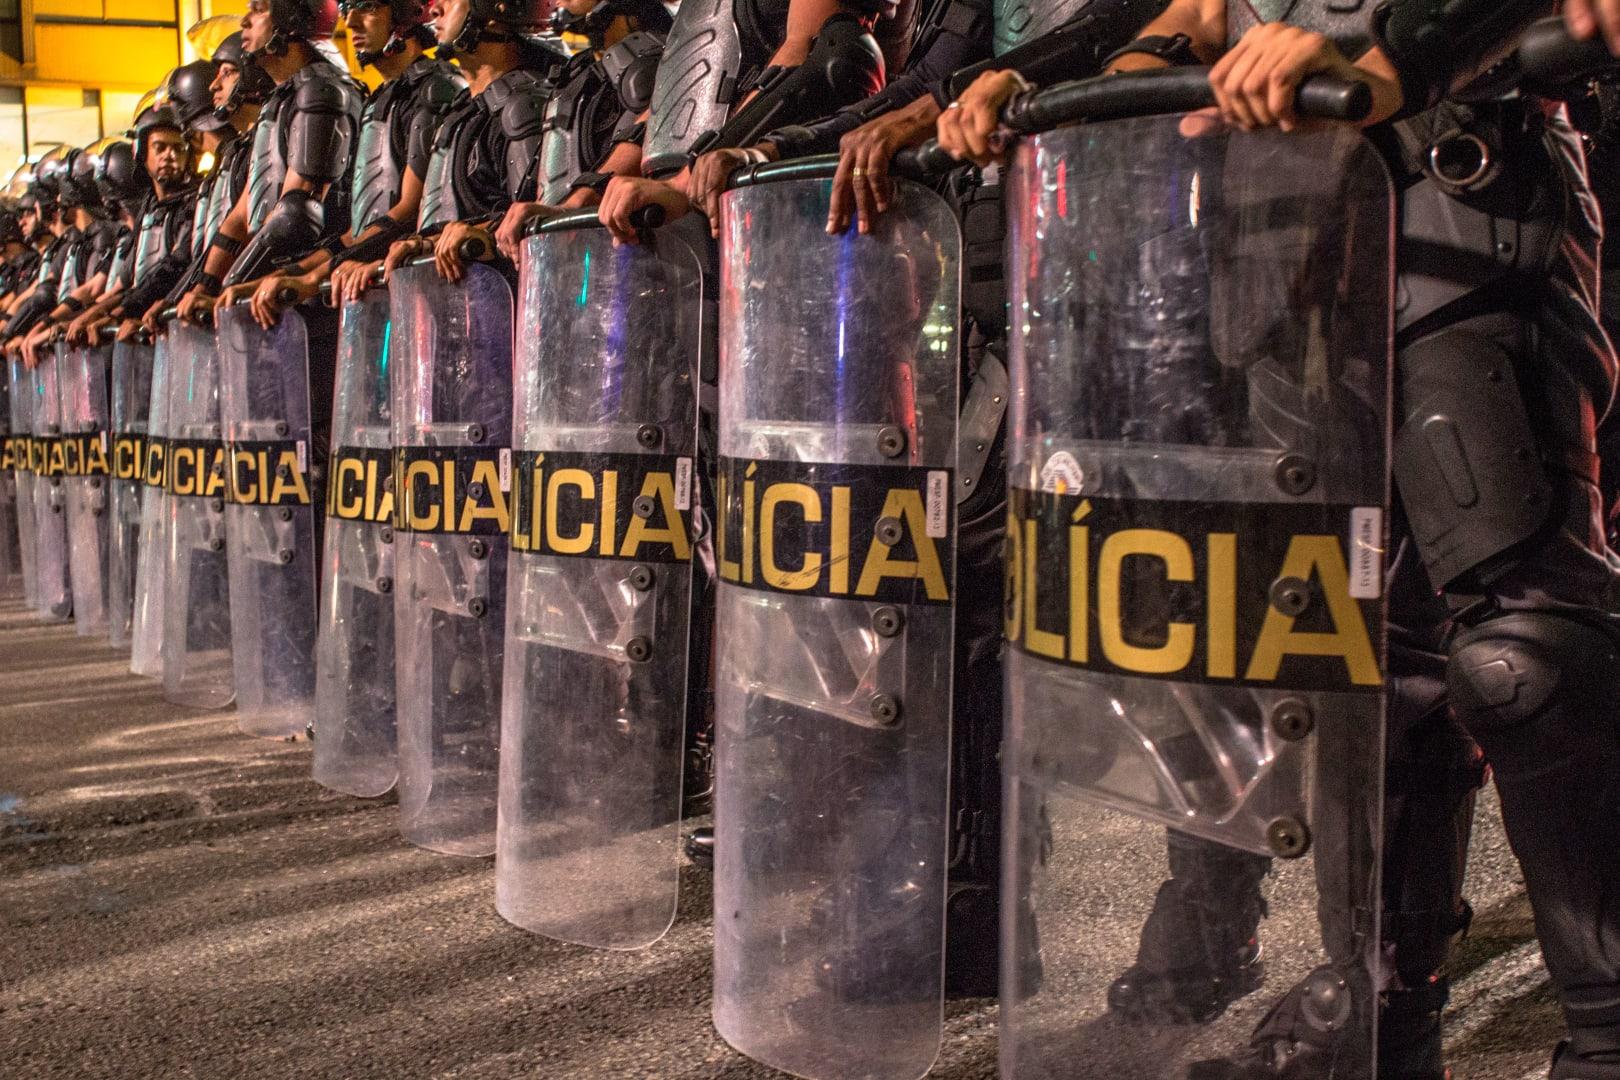 Law enforcement joins pro-Bolsonaro uprising in Brazil following 'free and fair’ election